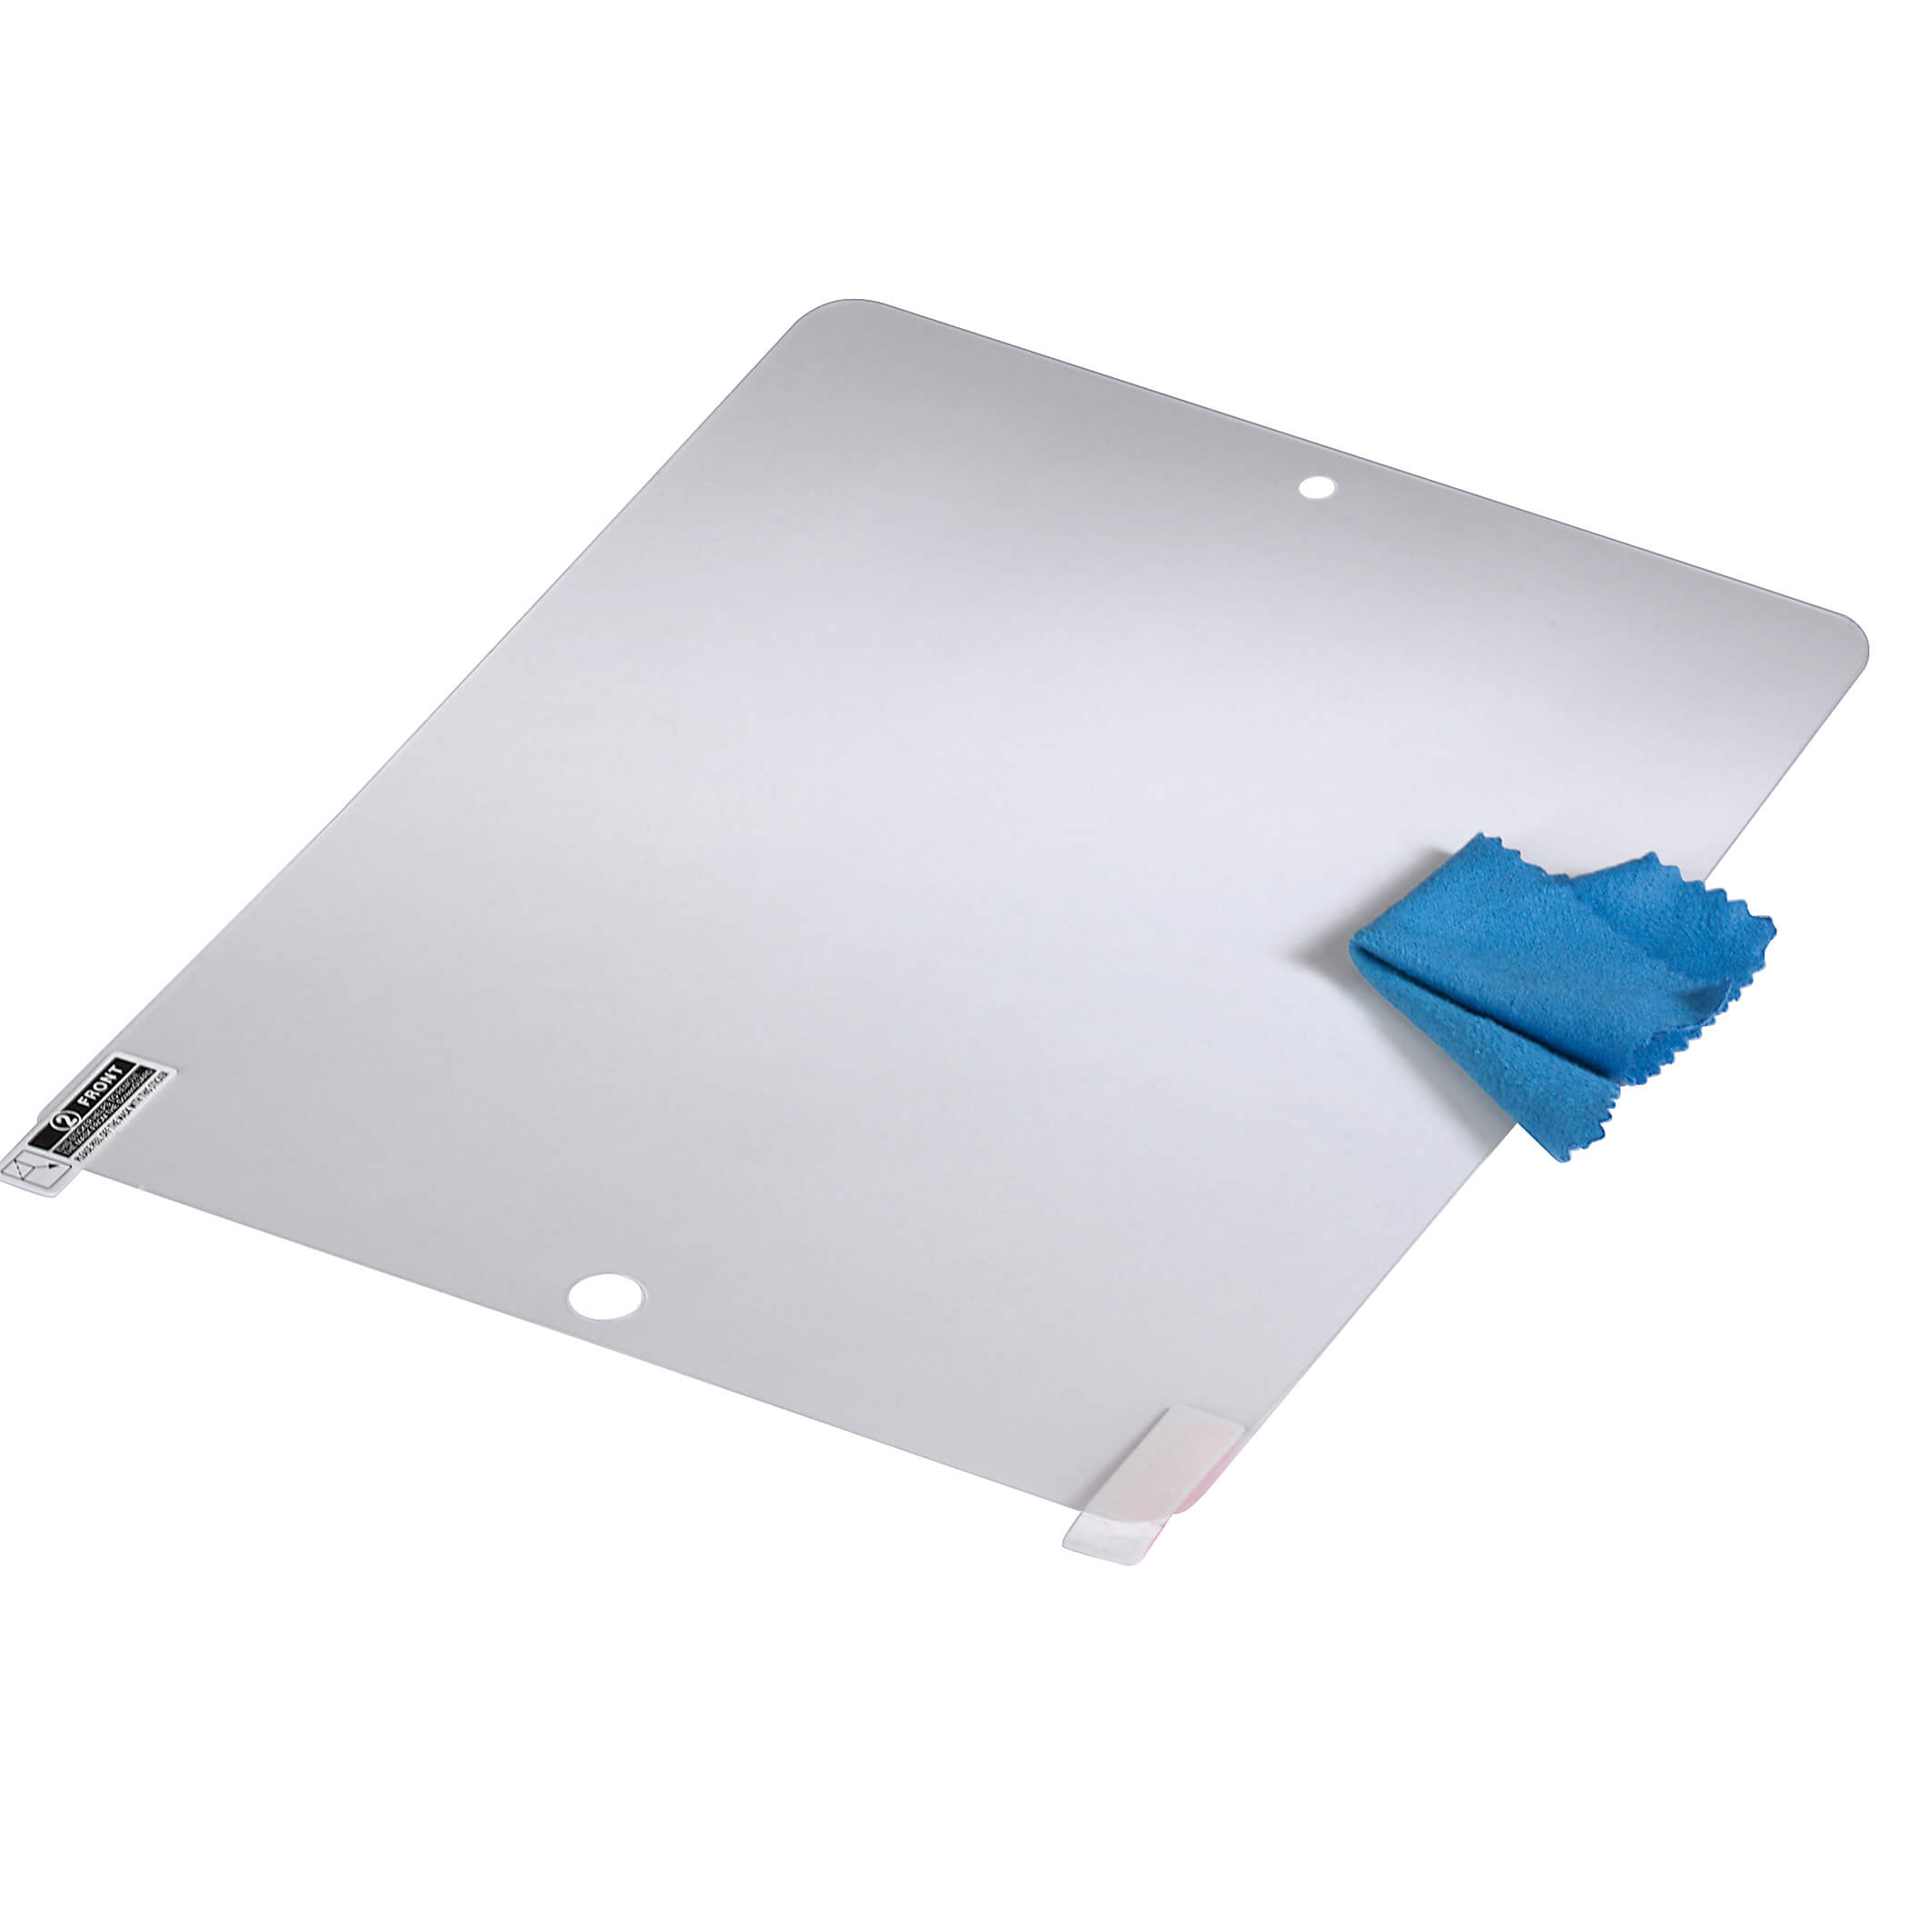 Pro-Class Protection Foil for Apple iPad 2/3rd Generation